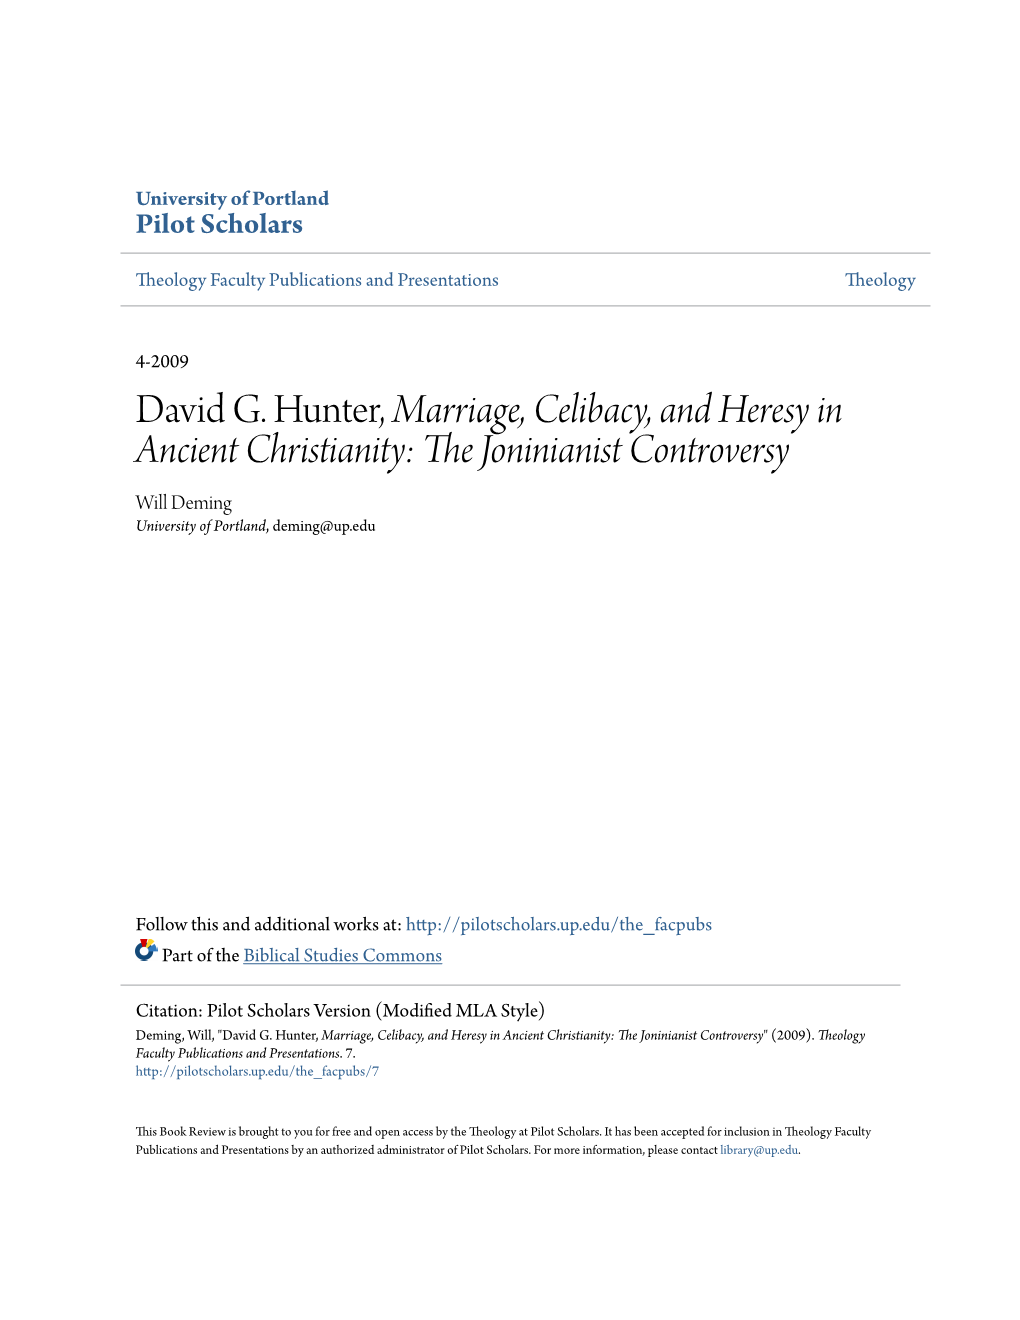 David G. Hunter, Marriage, Celibacy, and Heresy in Ancient Christianity: the Joninianist Controversy Will Deming University of Portland, Deming@Up.Edu